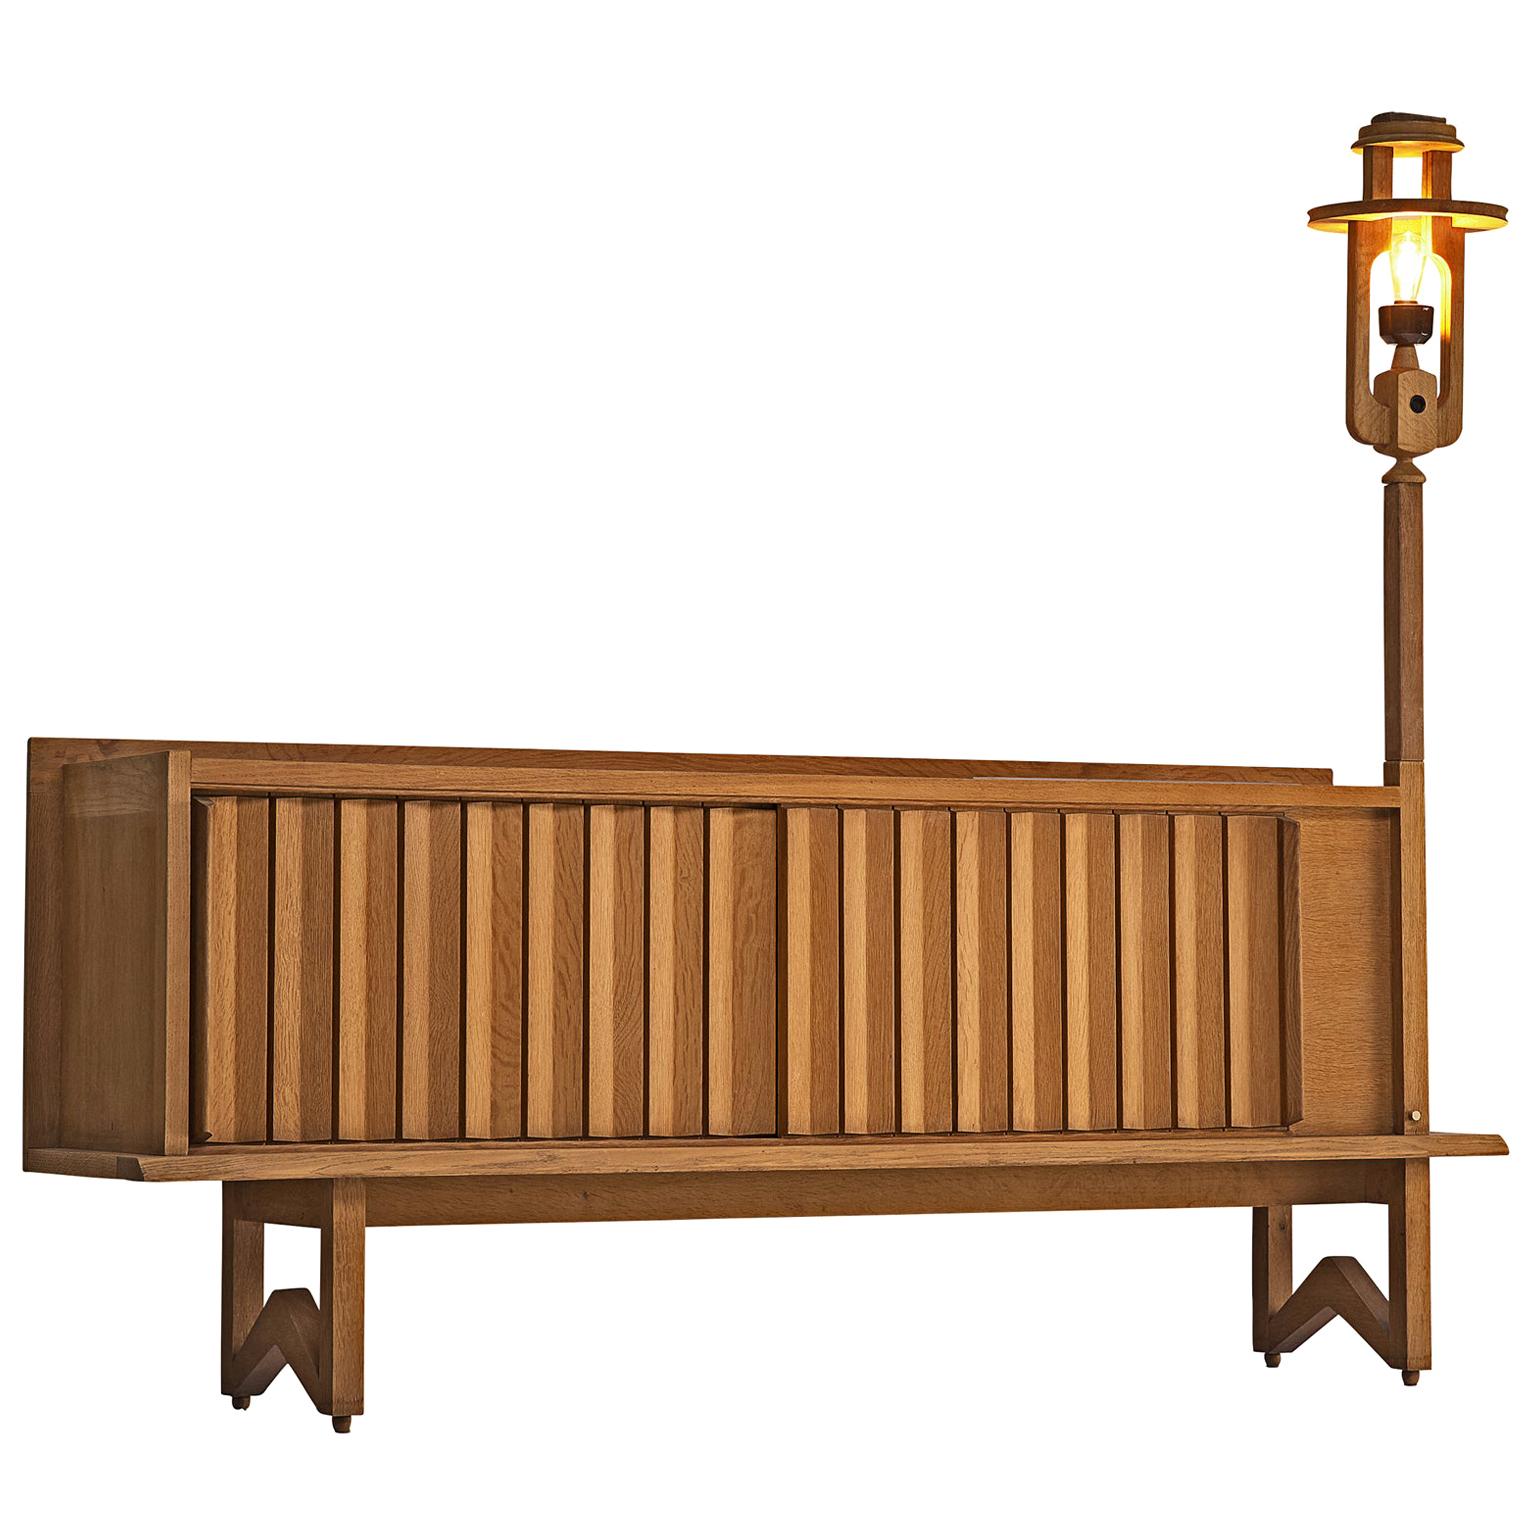 Guillerme & Chambron Credenza in Oak with Lantern